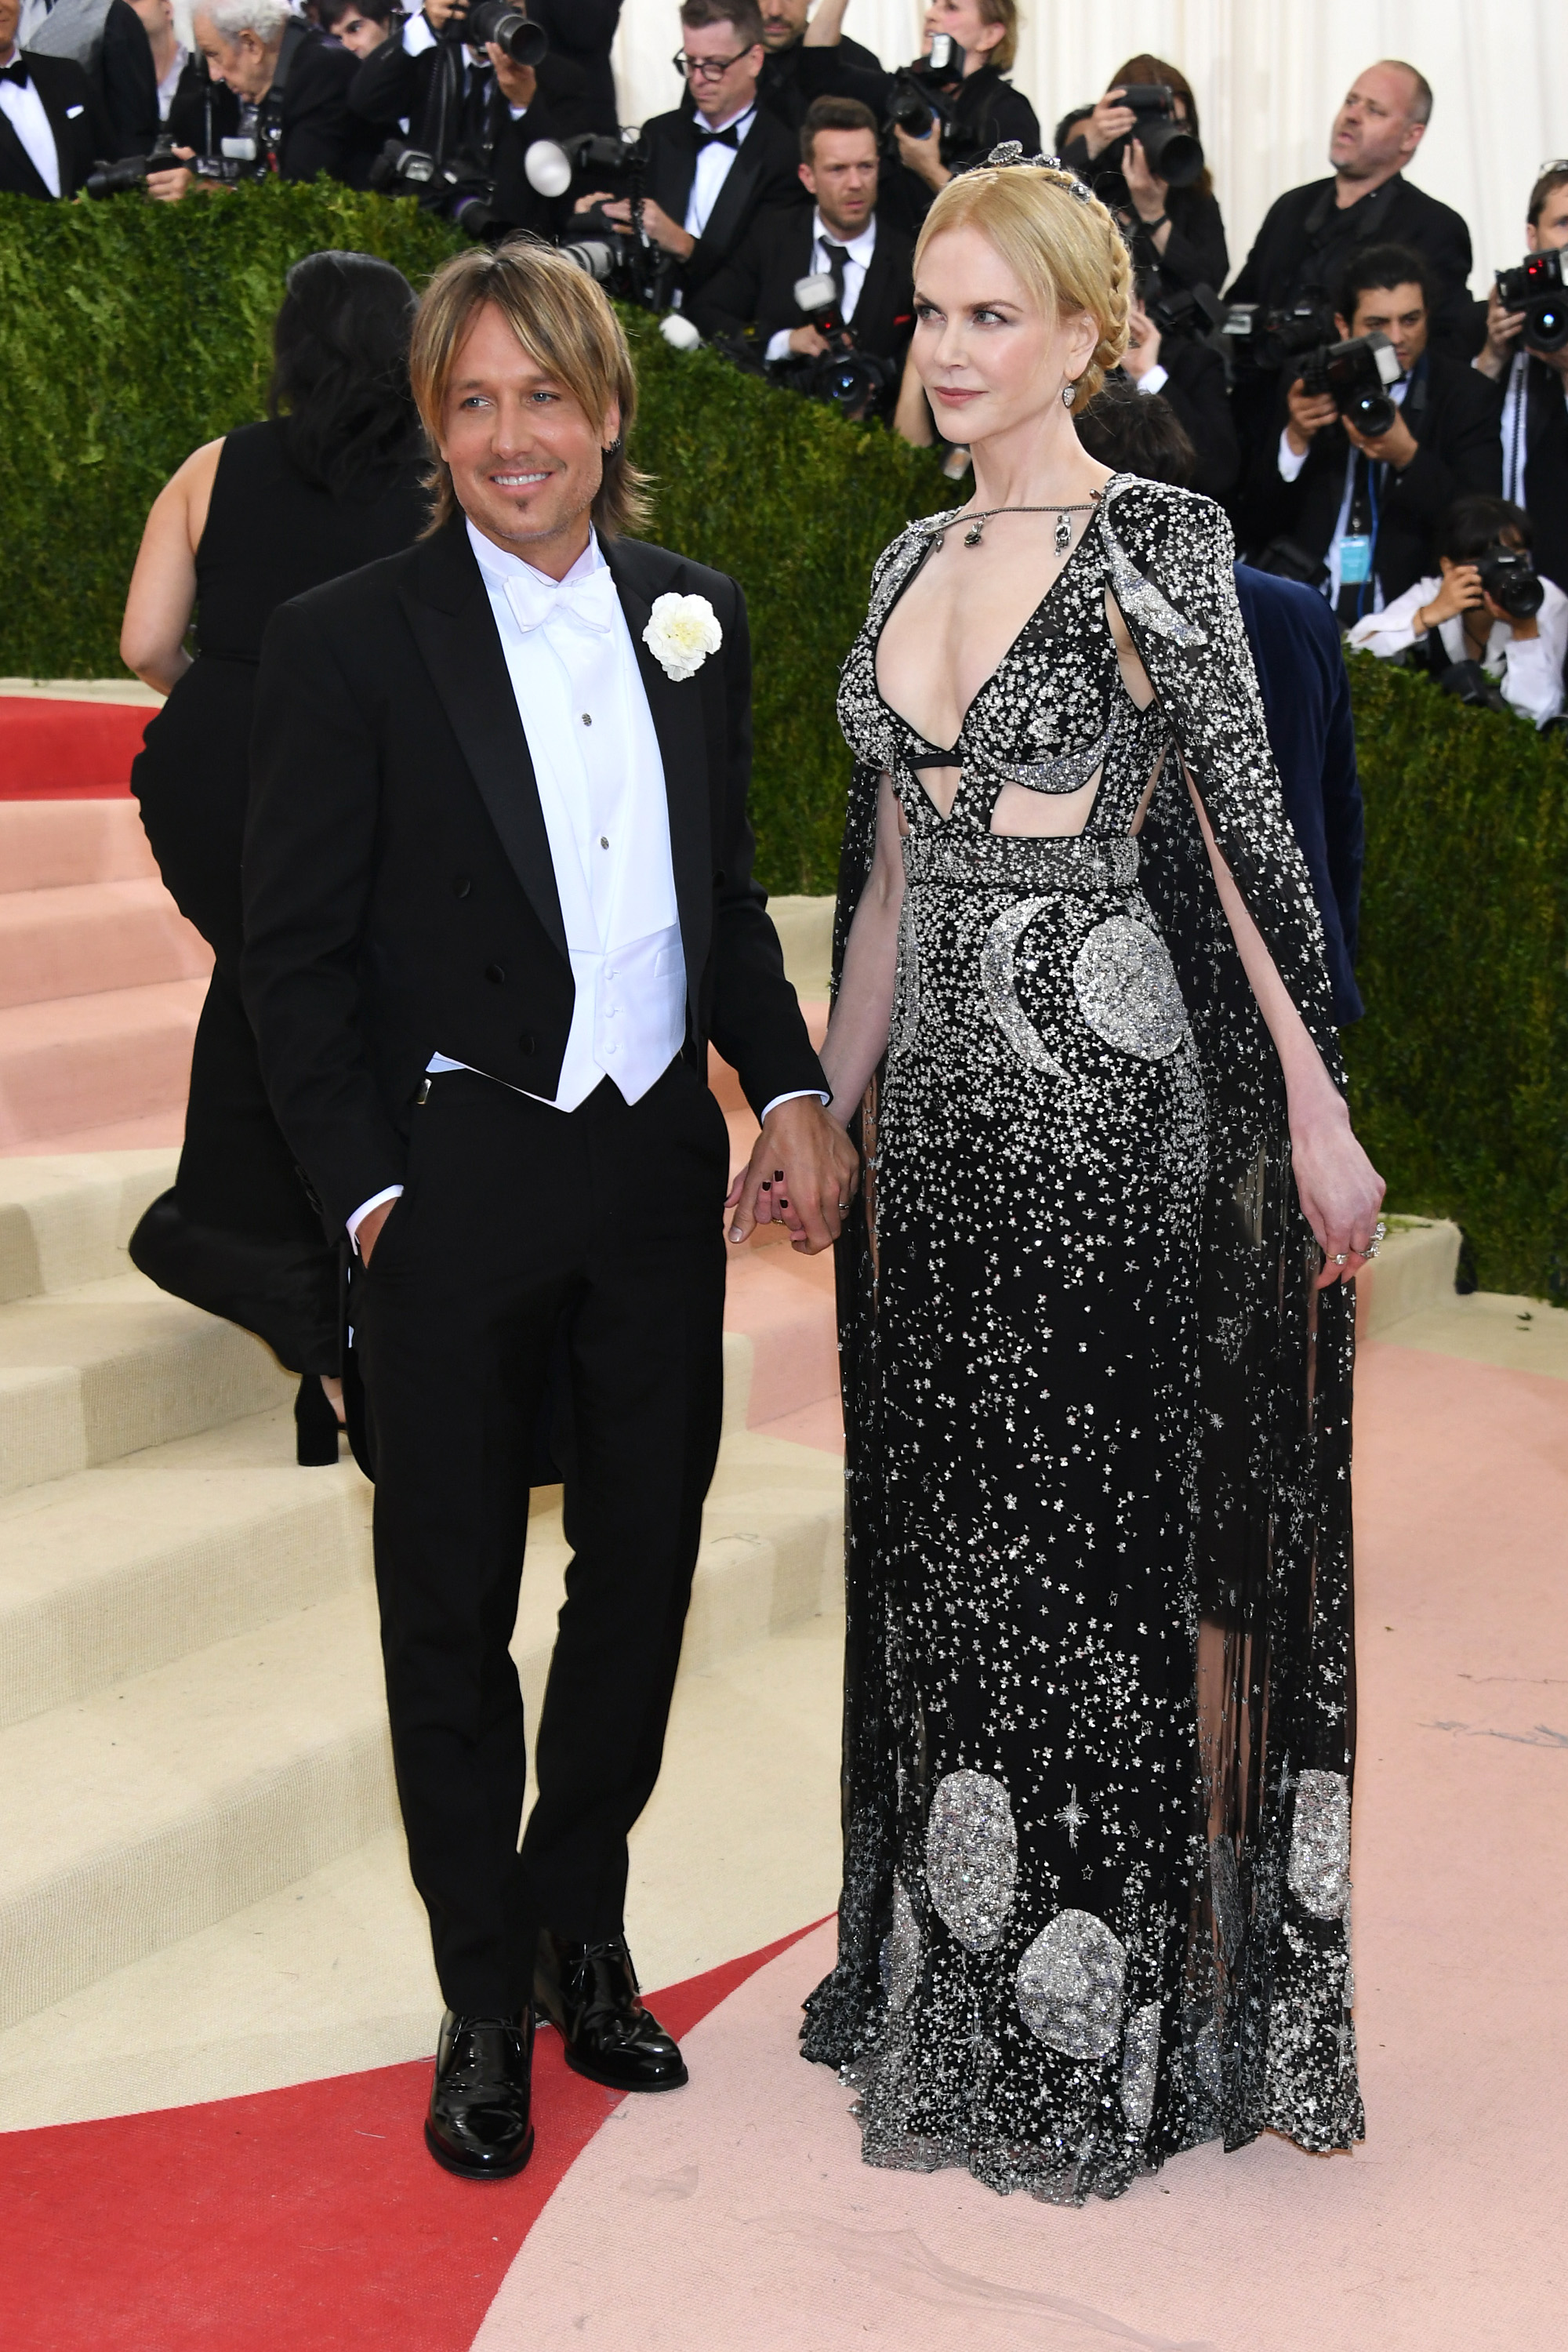 Keith Urban and Nicole Kidman attend "Manus x Machina: Fashion In An Age Of Technology" Costume Institute Gala at Metropolitan Museum of Art on May 2, 2016 in New York City.